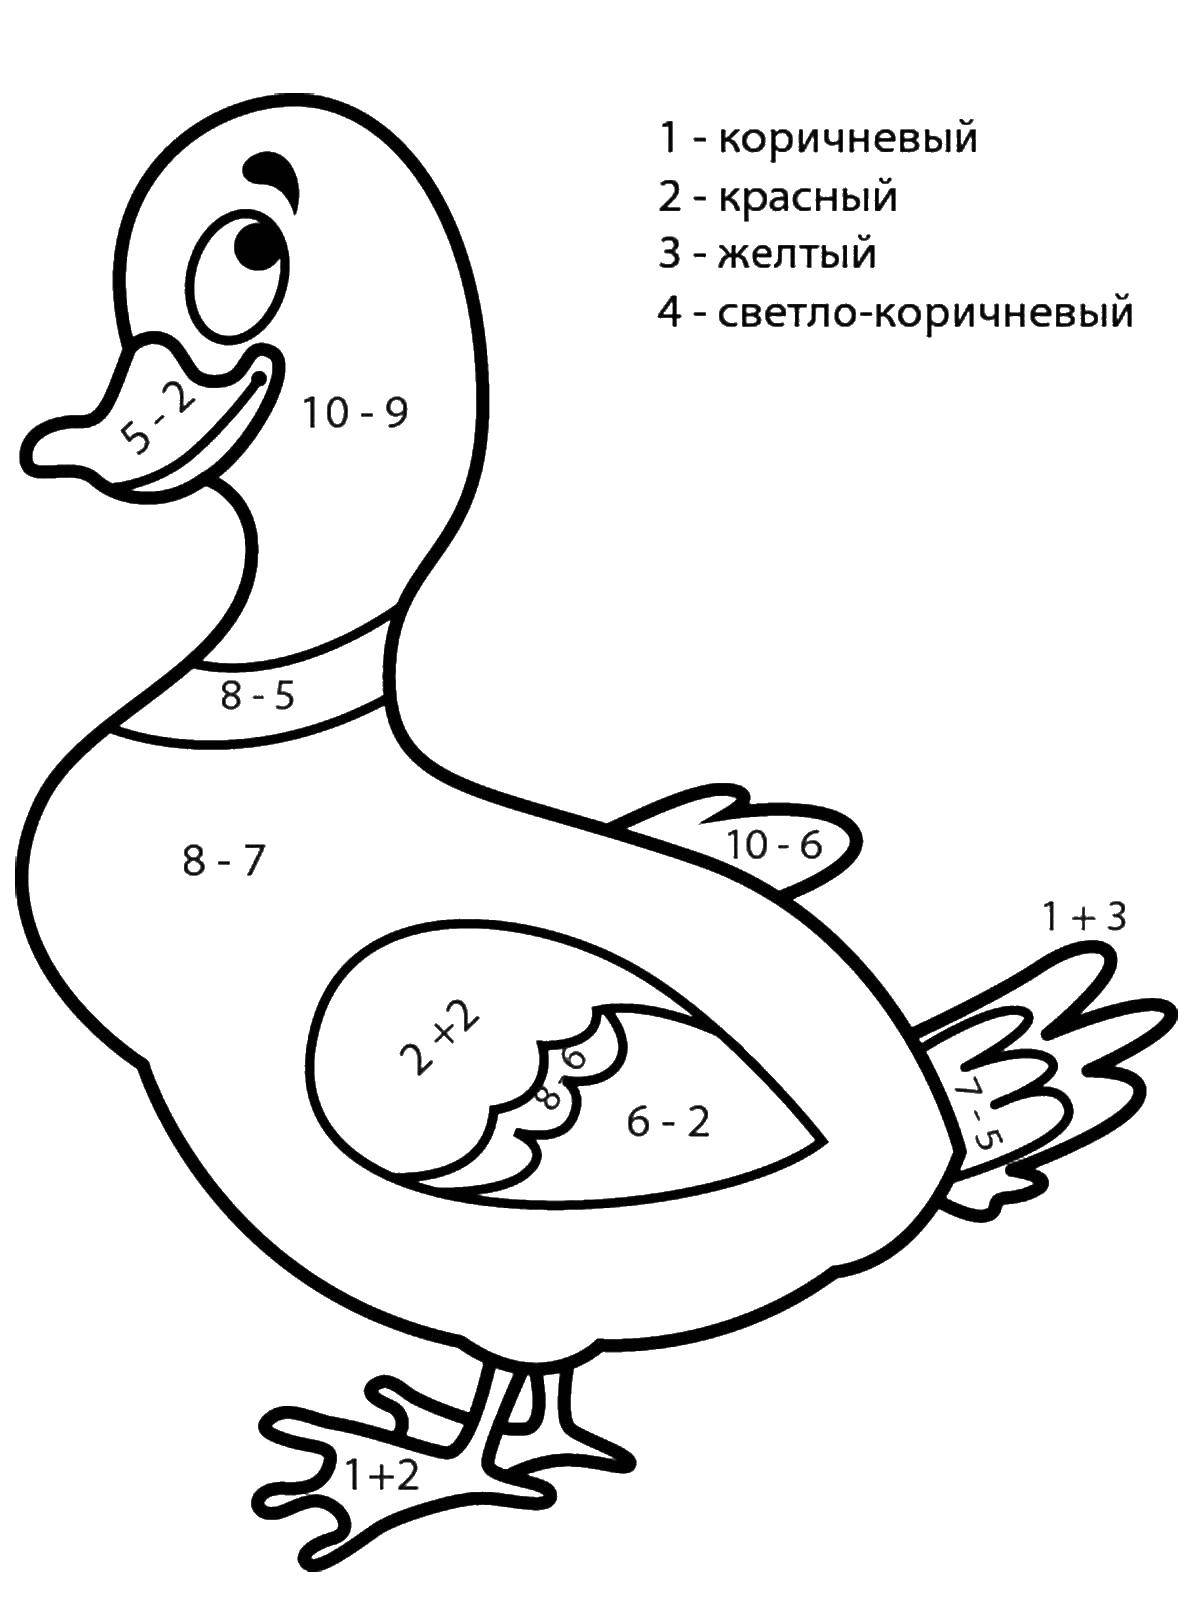 Coloring Paint a duck deciding examples. Category mathematical coloring pages. Tags:  the duck, mathematics, examples.